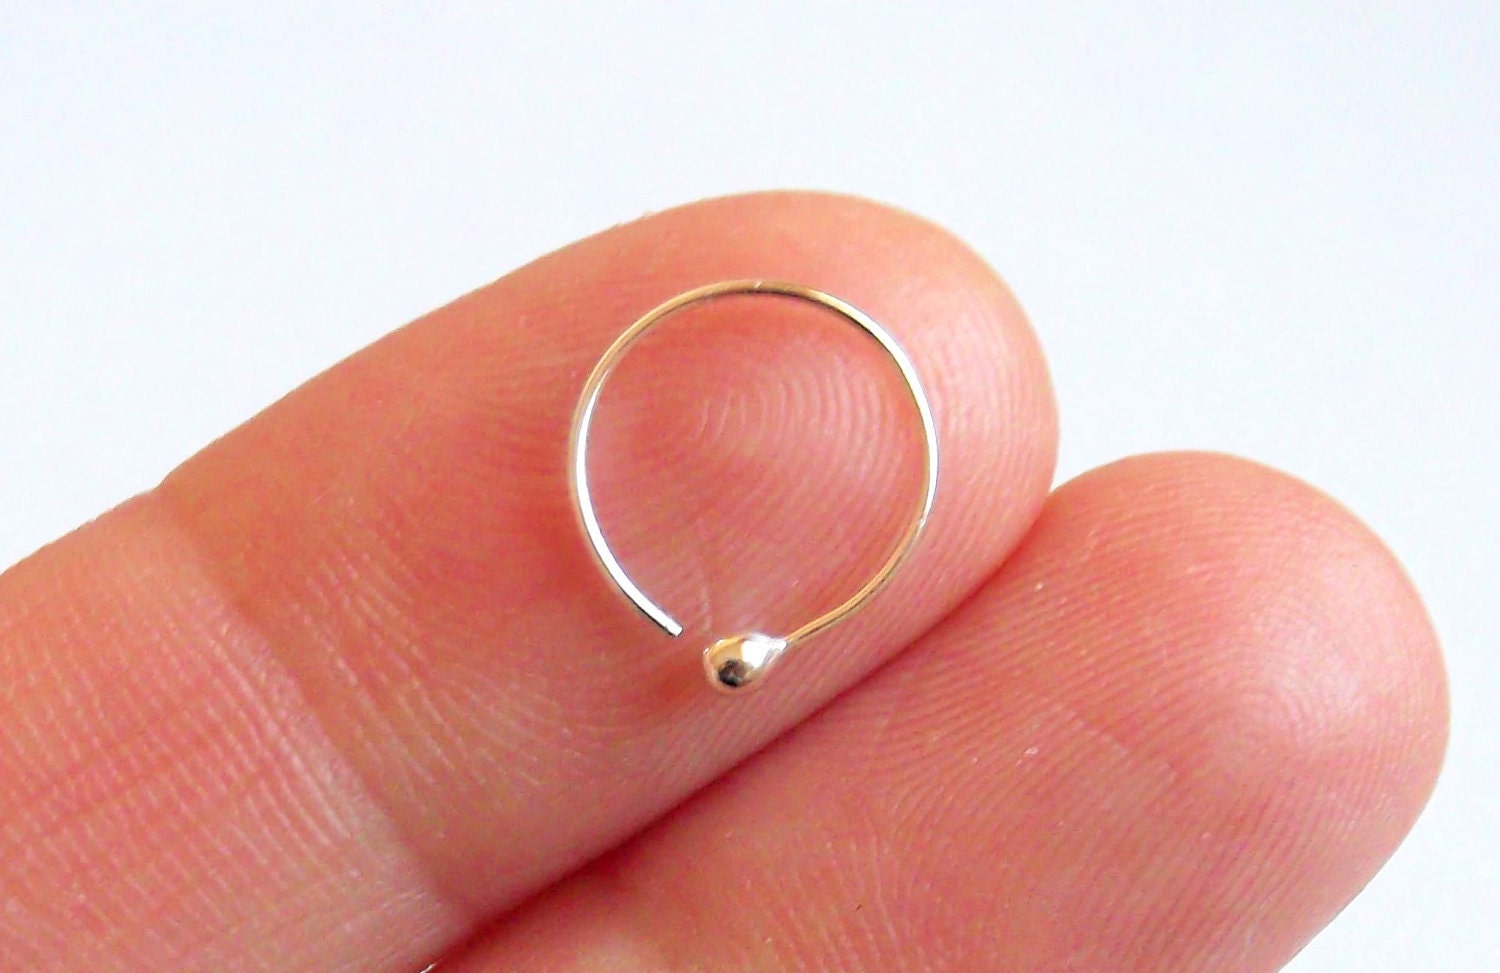 Ball End Nose Hoop Pure Silver 24 Gauge Nose Ring Fine